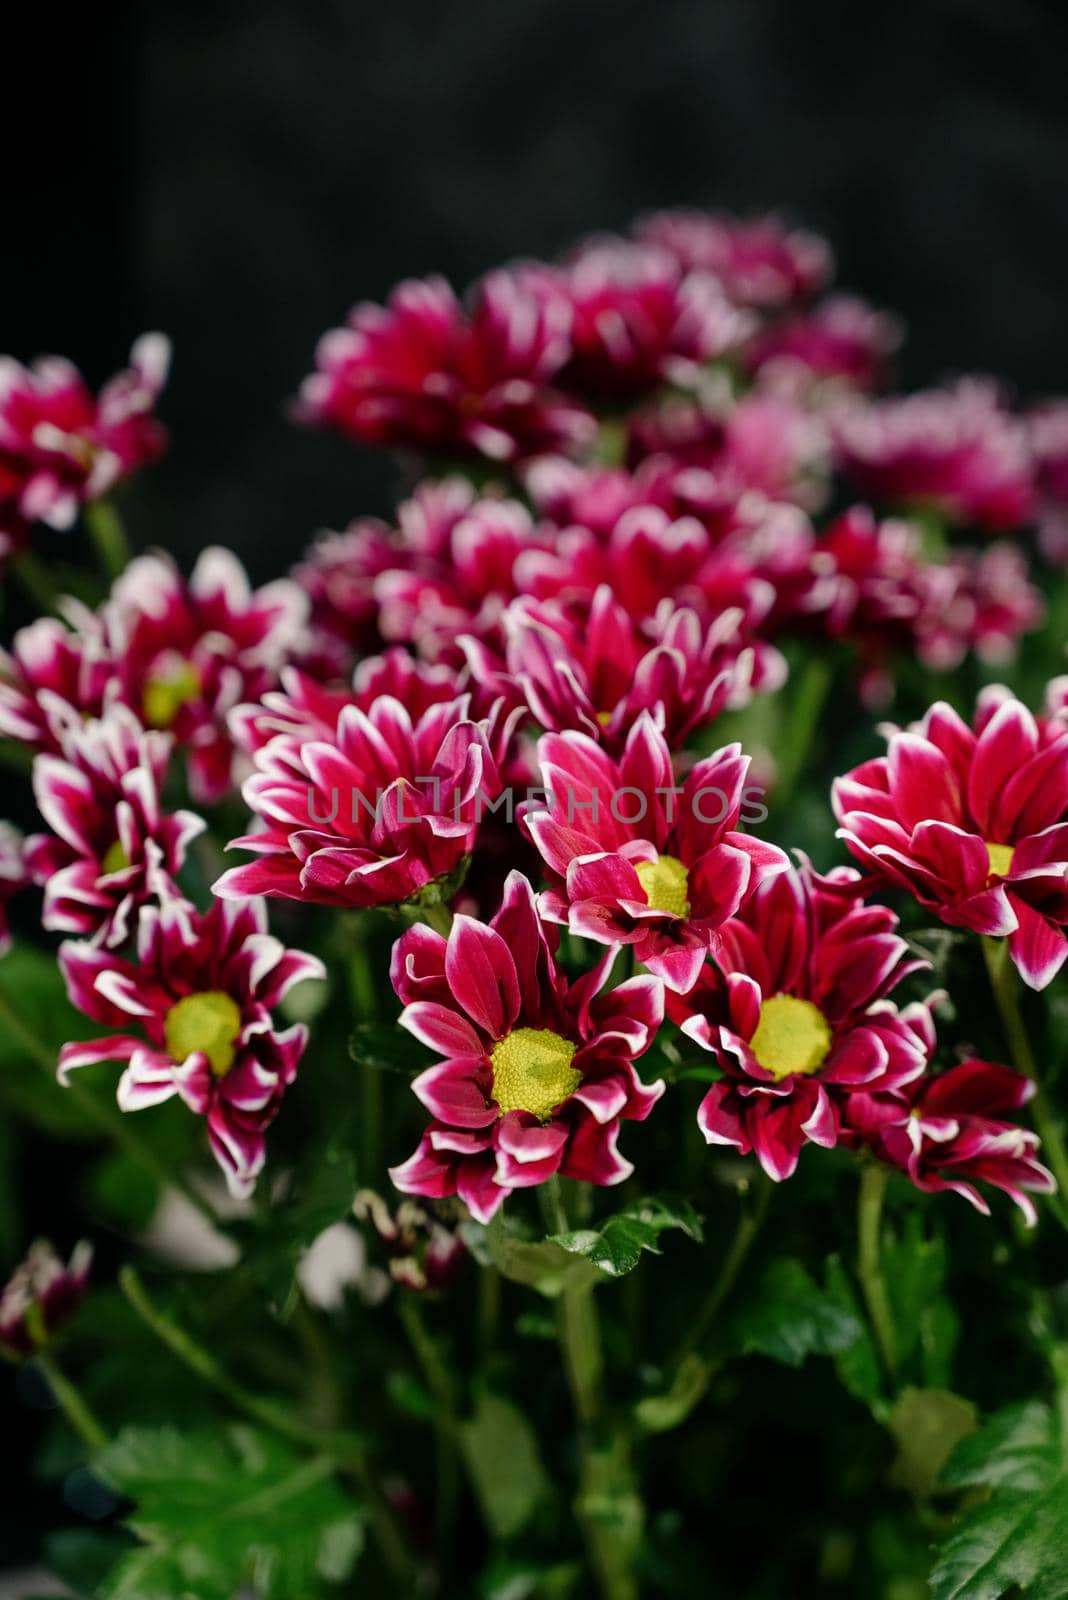 Close-up of a bouquet of dark pink chrysanthemum flowers.pink winter chrysanthemum flowers with space for text. garden chrysanthemum. floral wallpaper background